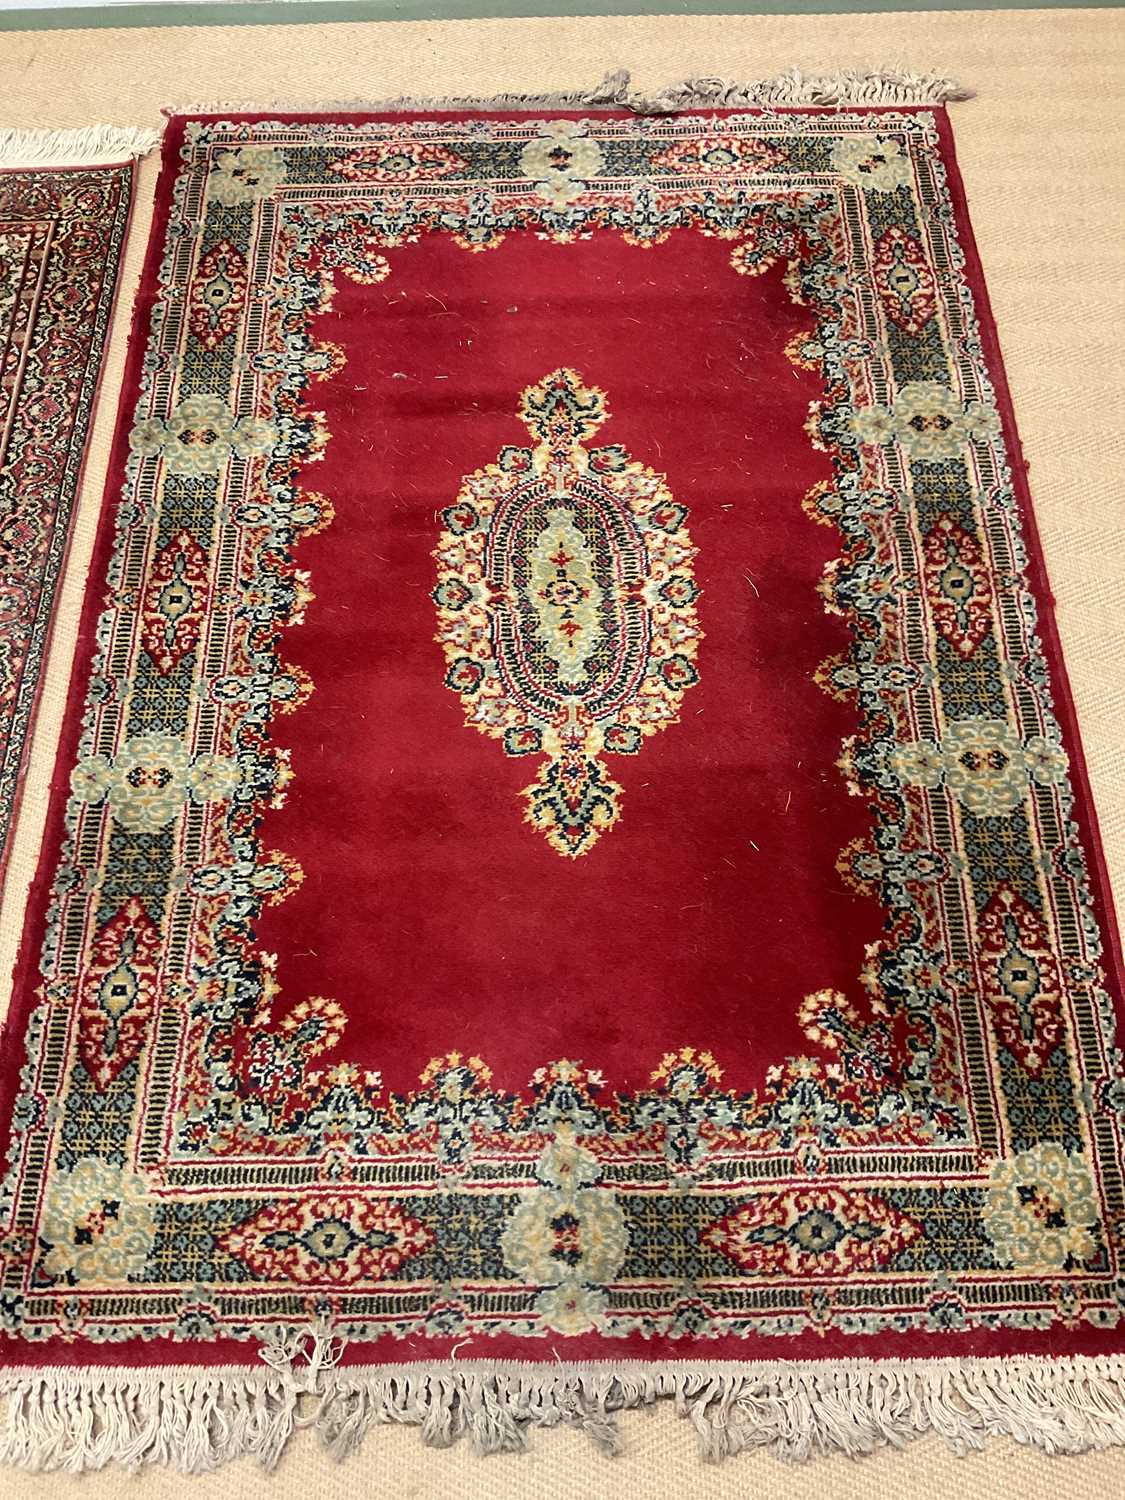 Two vintage Eastern rugs, one a dark red rug with central medallion and decorative border, 122 x - Image 3 of 6